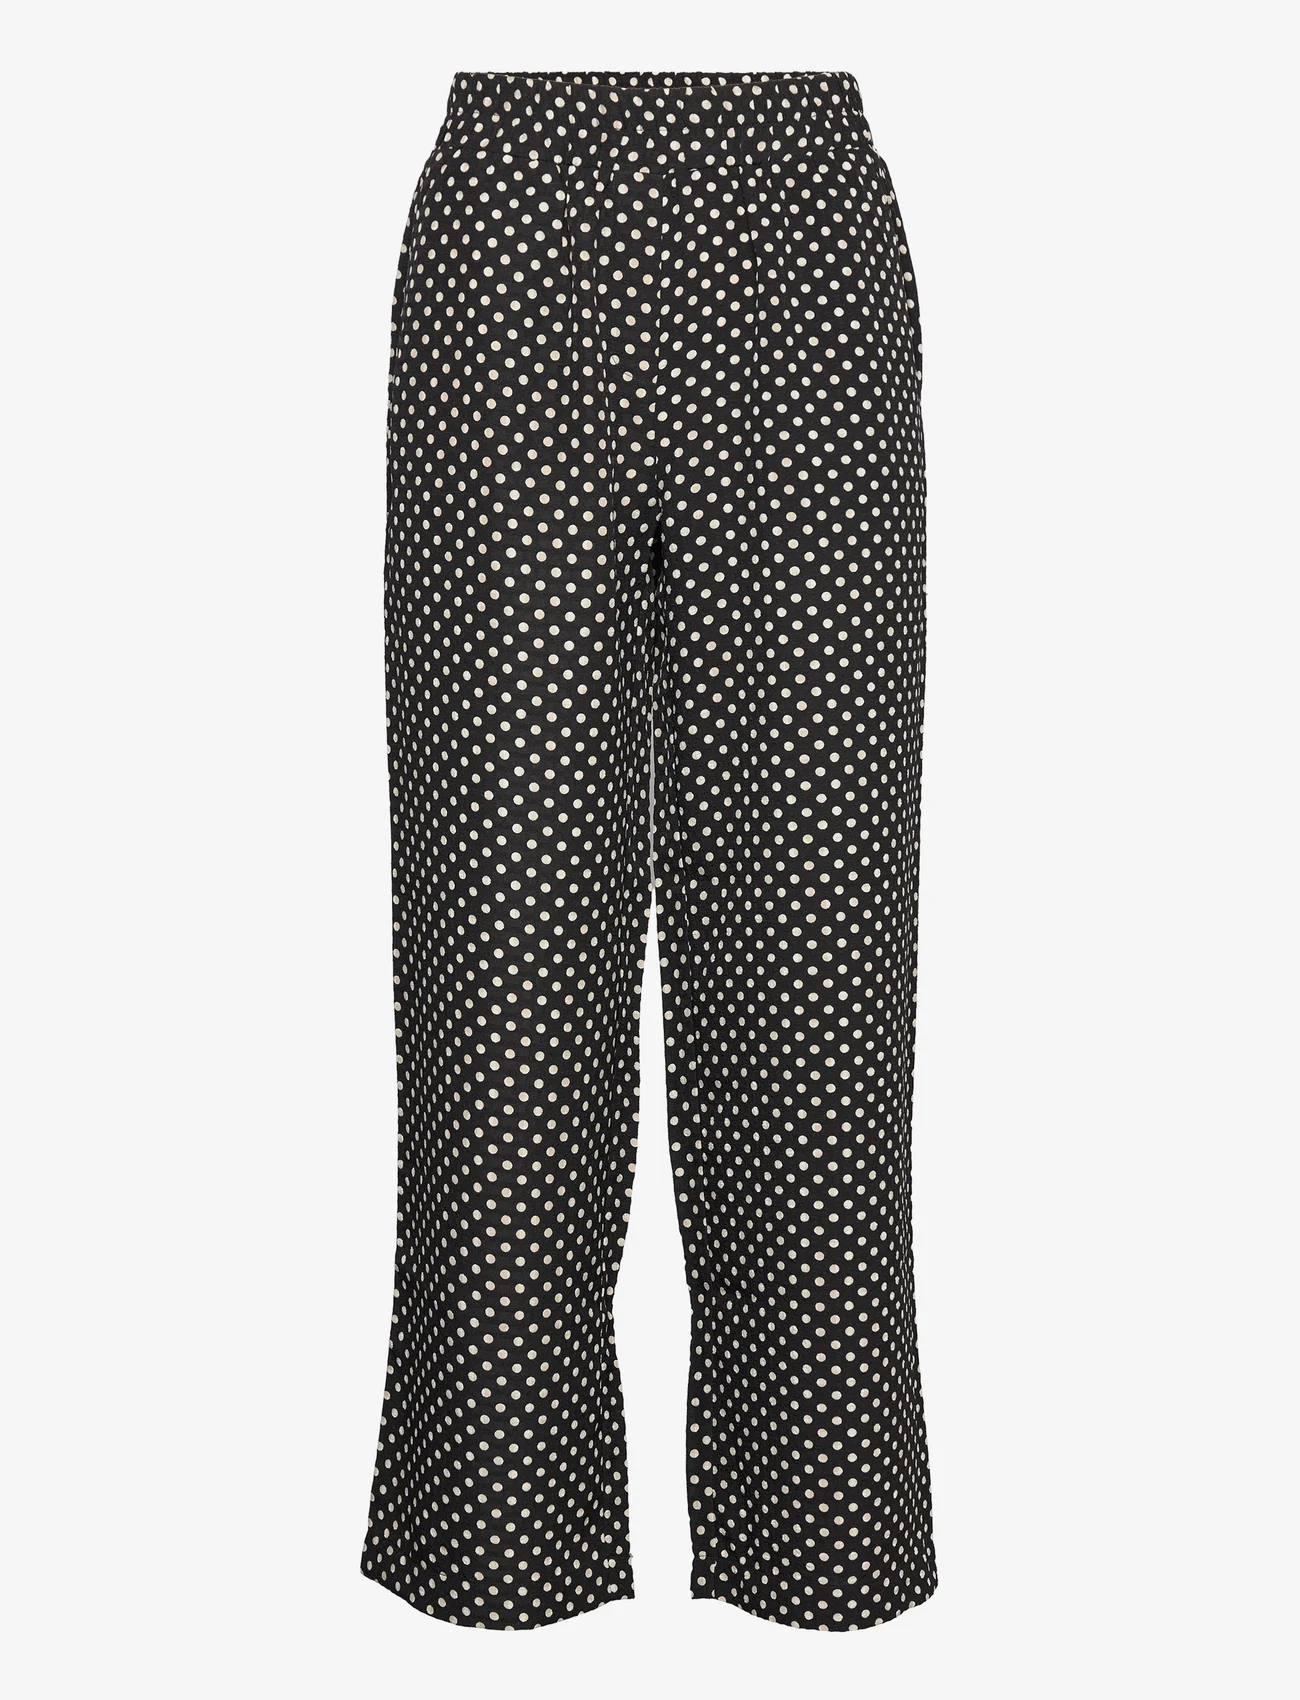 A-View - Oda pant - black with dots - 0